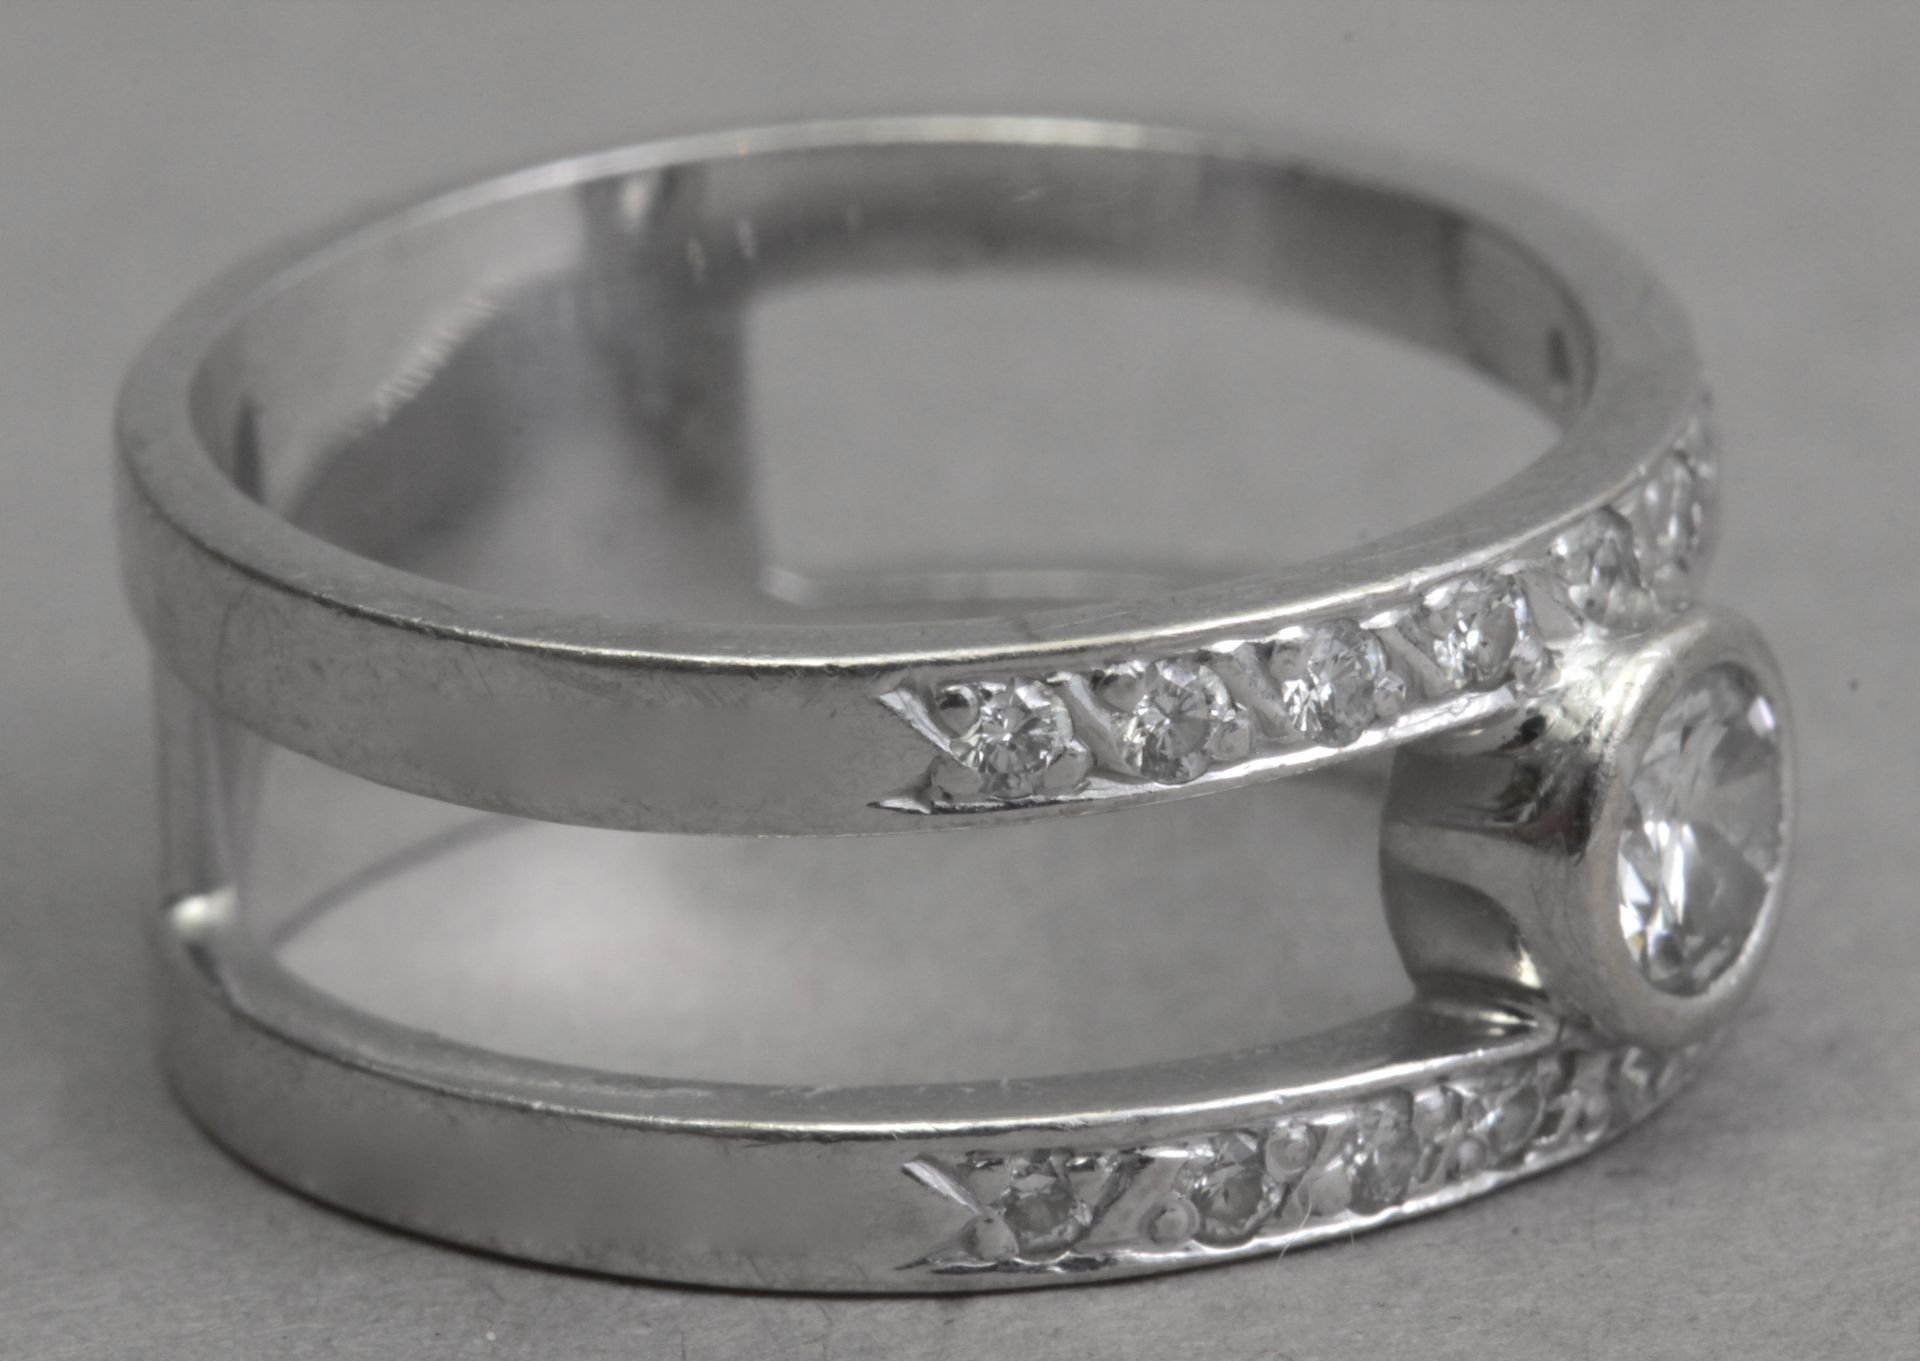 A diamond ring with a white gold setting - Image 2 of 3